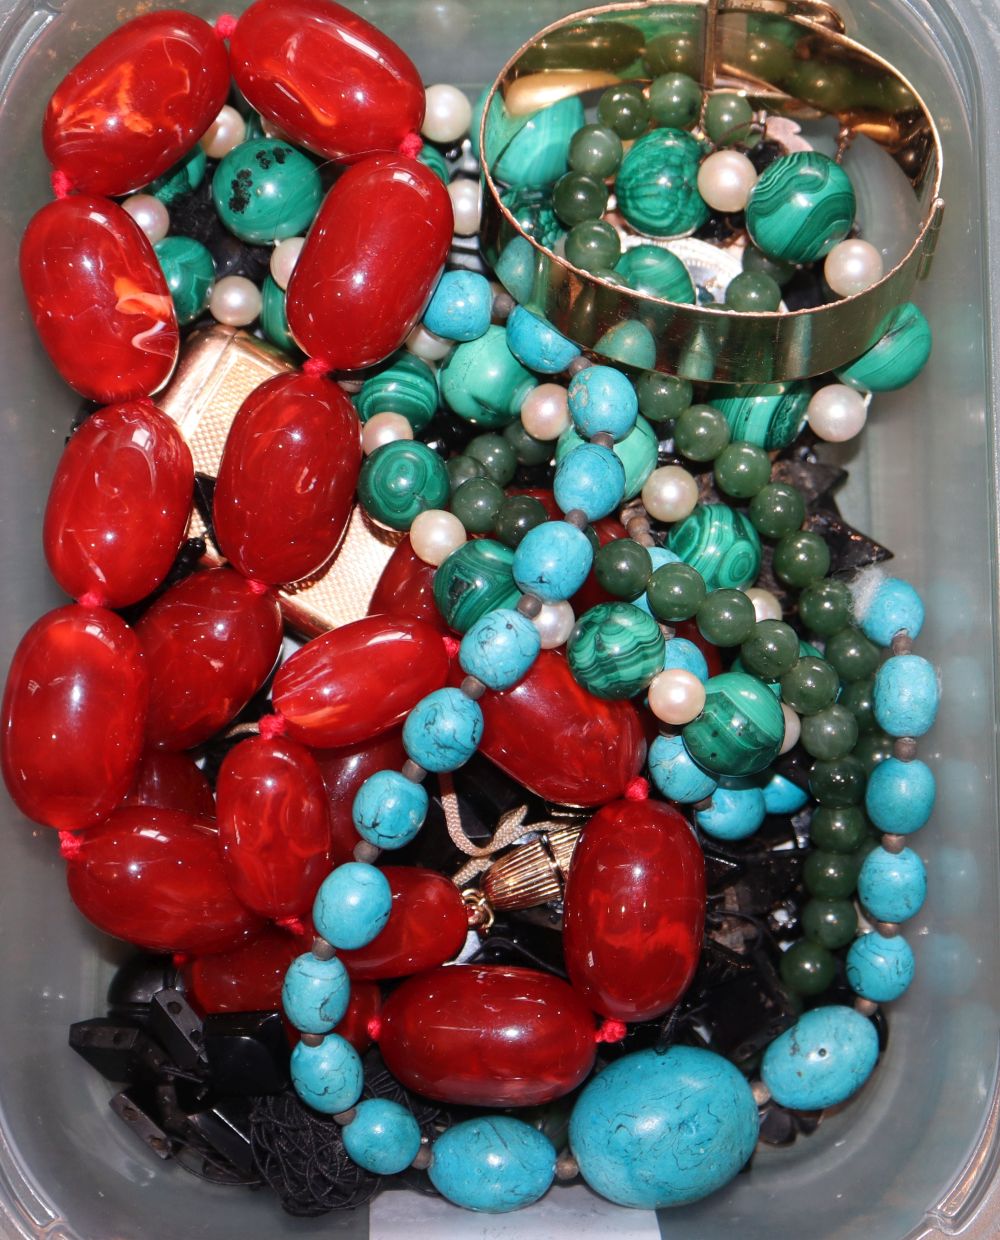 Sundry bead necklaces etc. including malachite and faux amber.